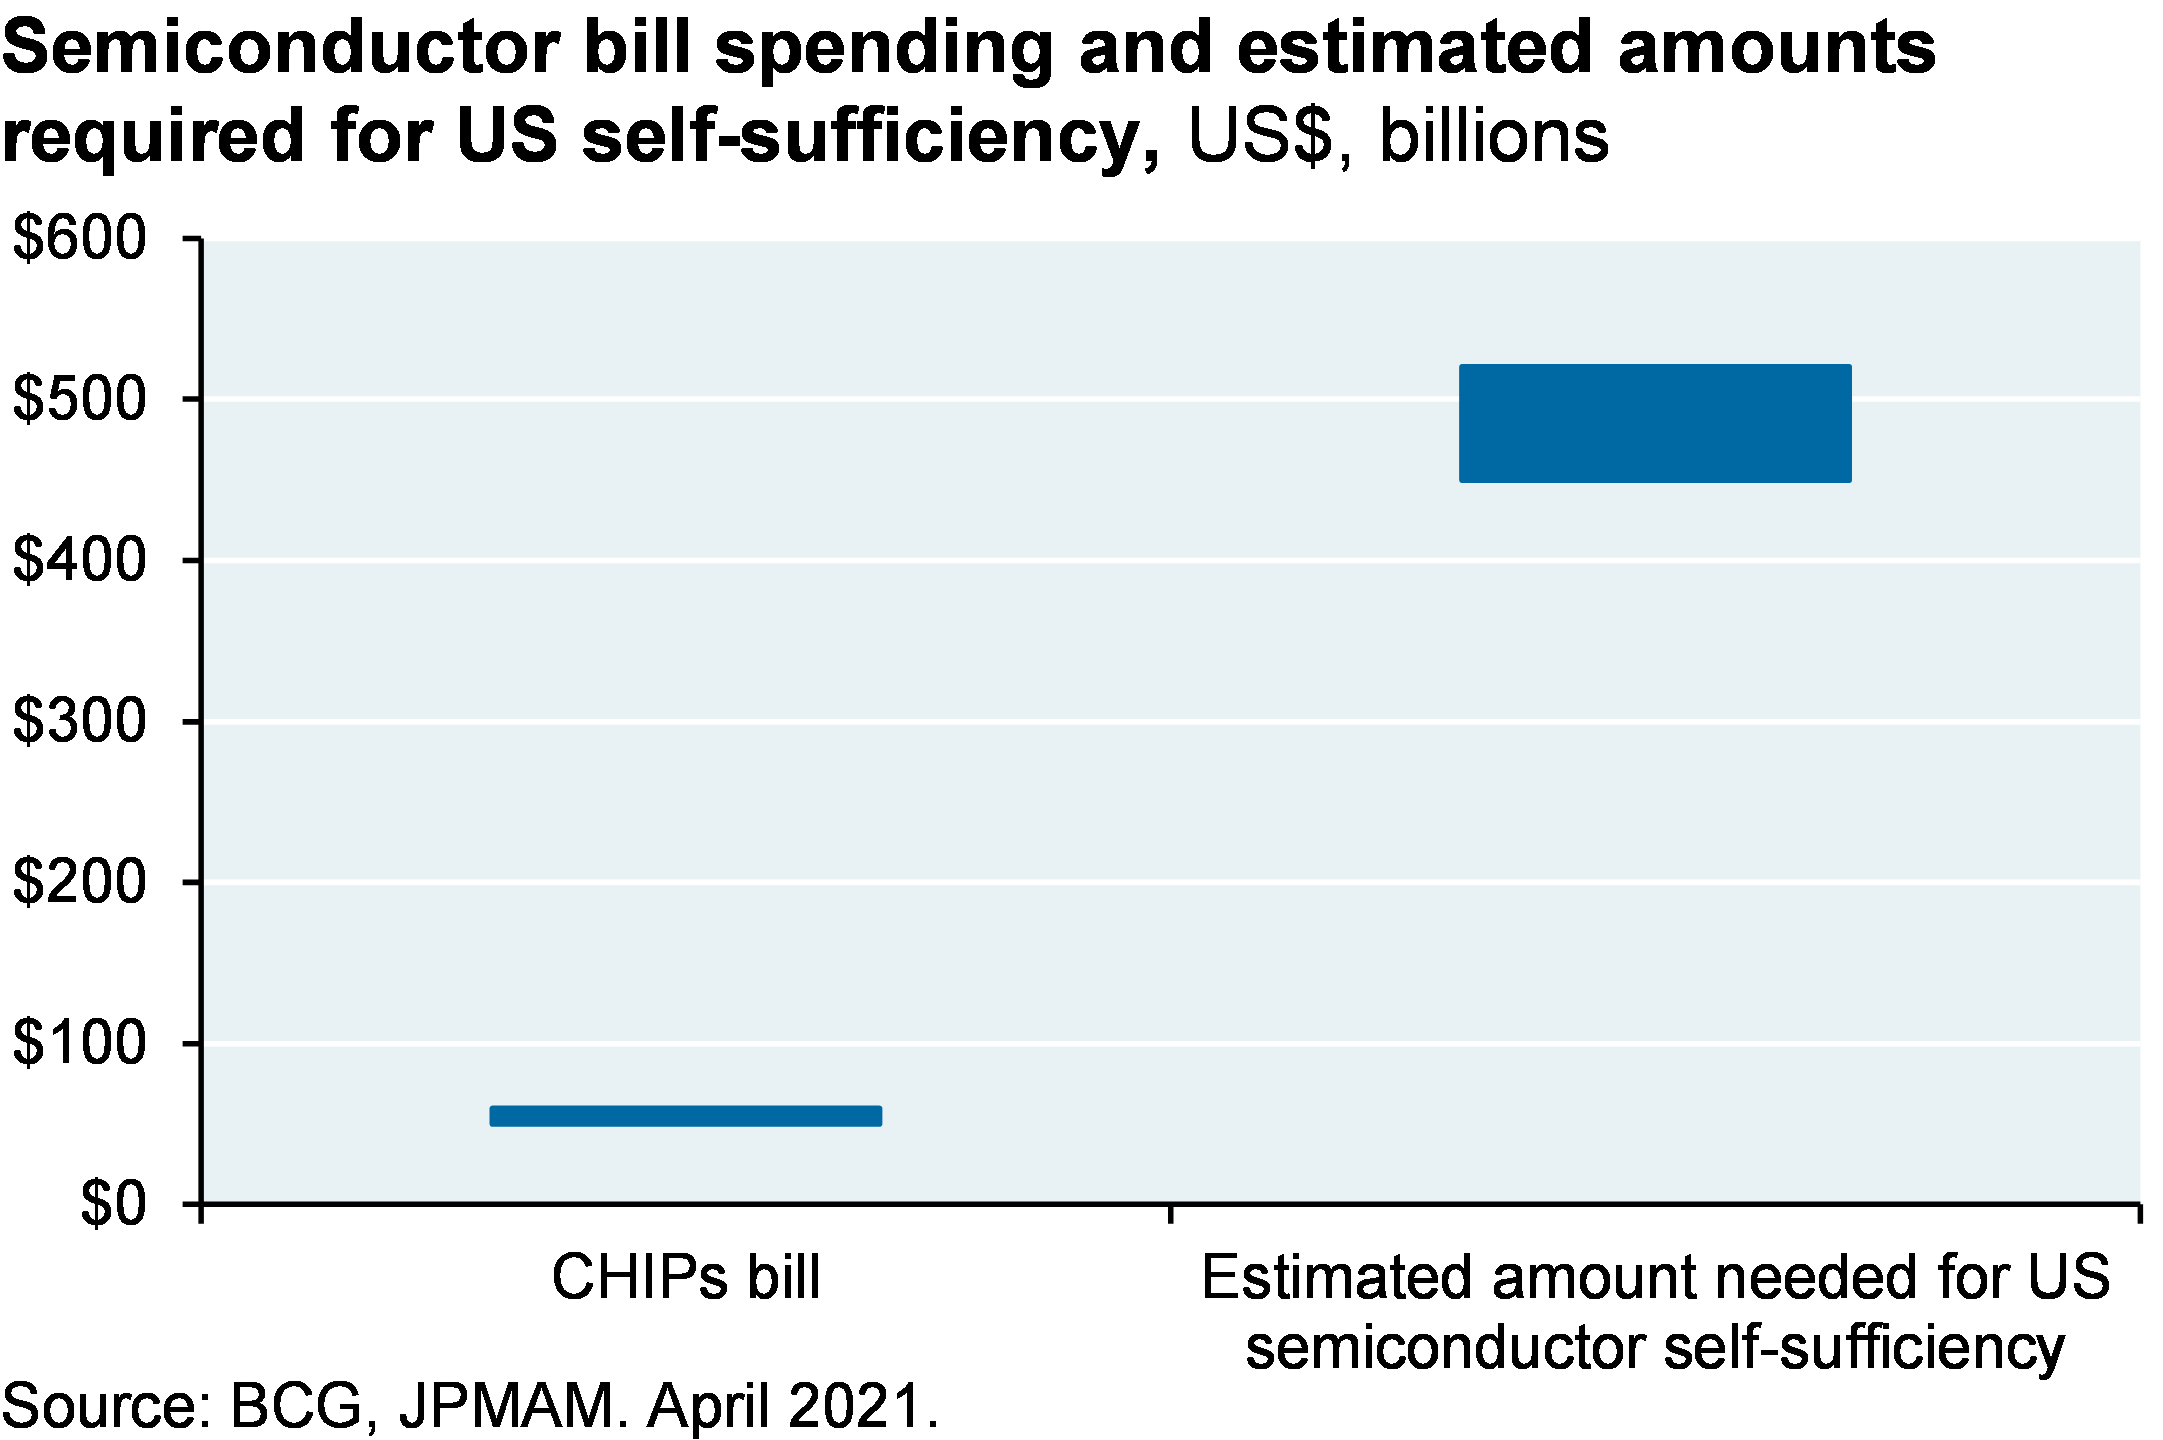 Bar chart compares the estimated amount ($52 billion) of spending in the CHIPS bill dedicated to semiconductor capacity versus the estimated amount required for the US to be semiconductor self-sufficient. The chart illustrates that the CHIPs bill spending is roughly 10% of what would be needed for complete US semiconductor self-sufficiency.